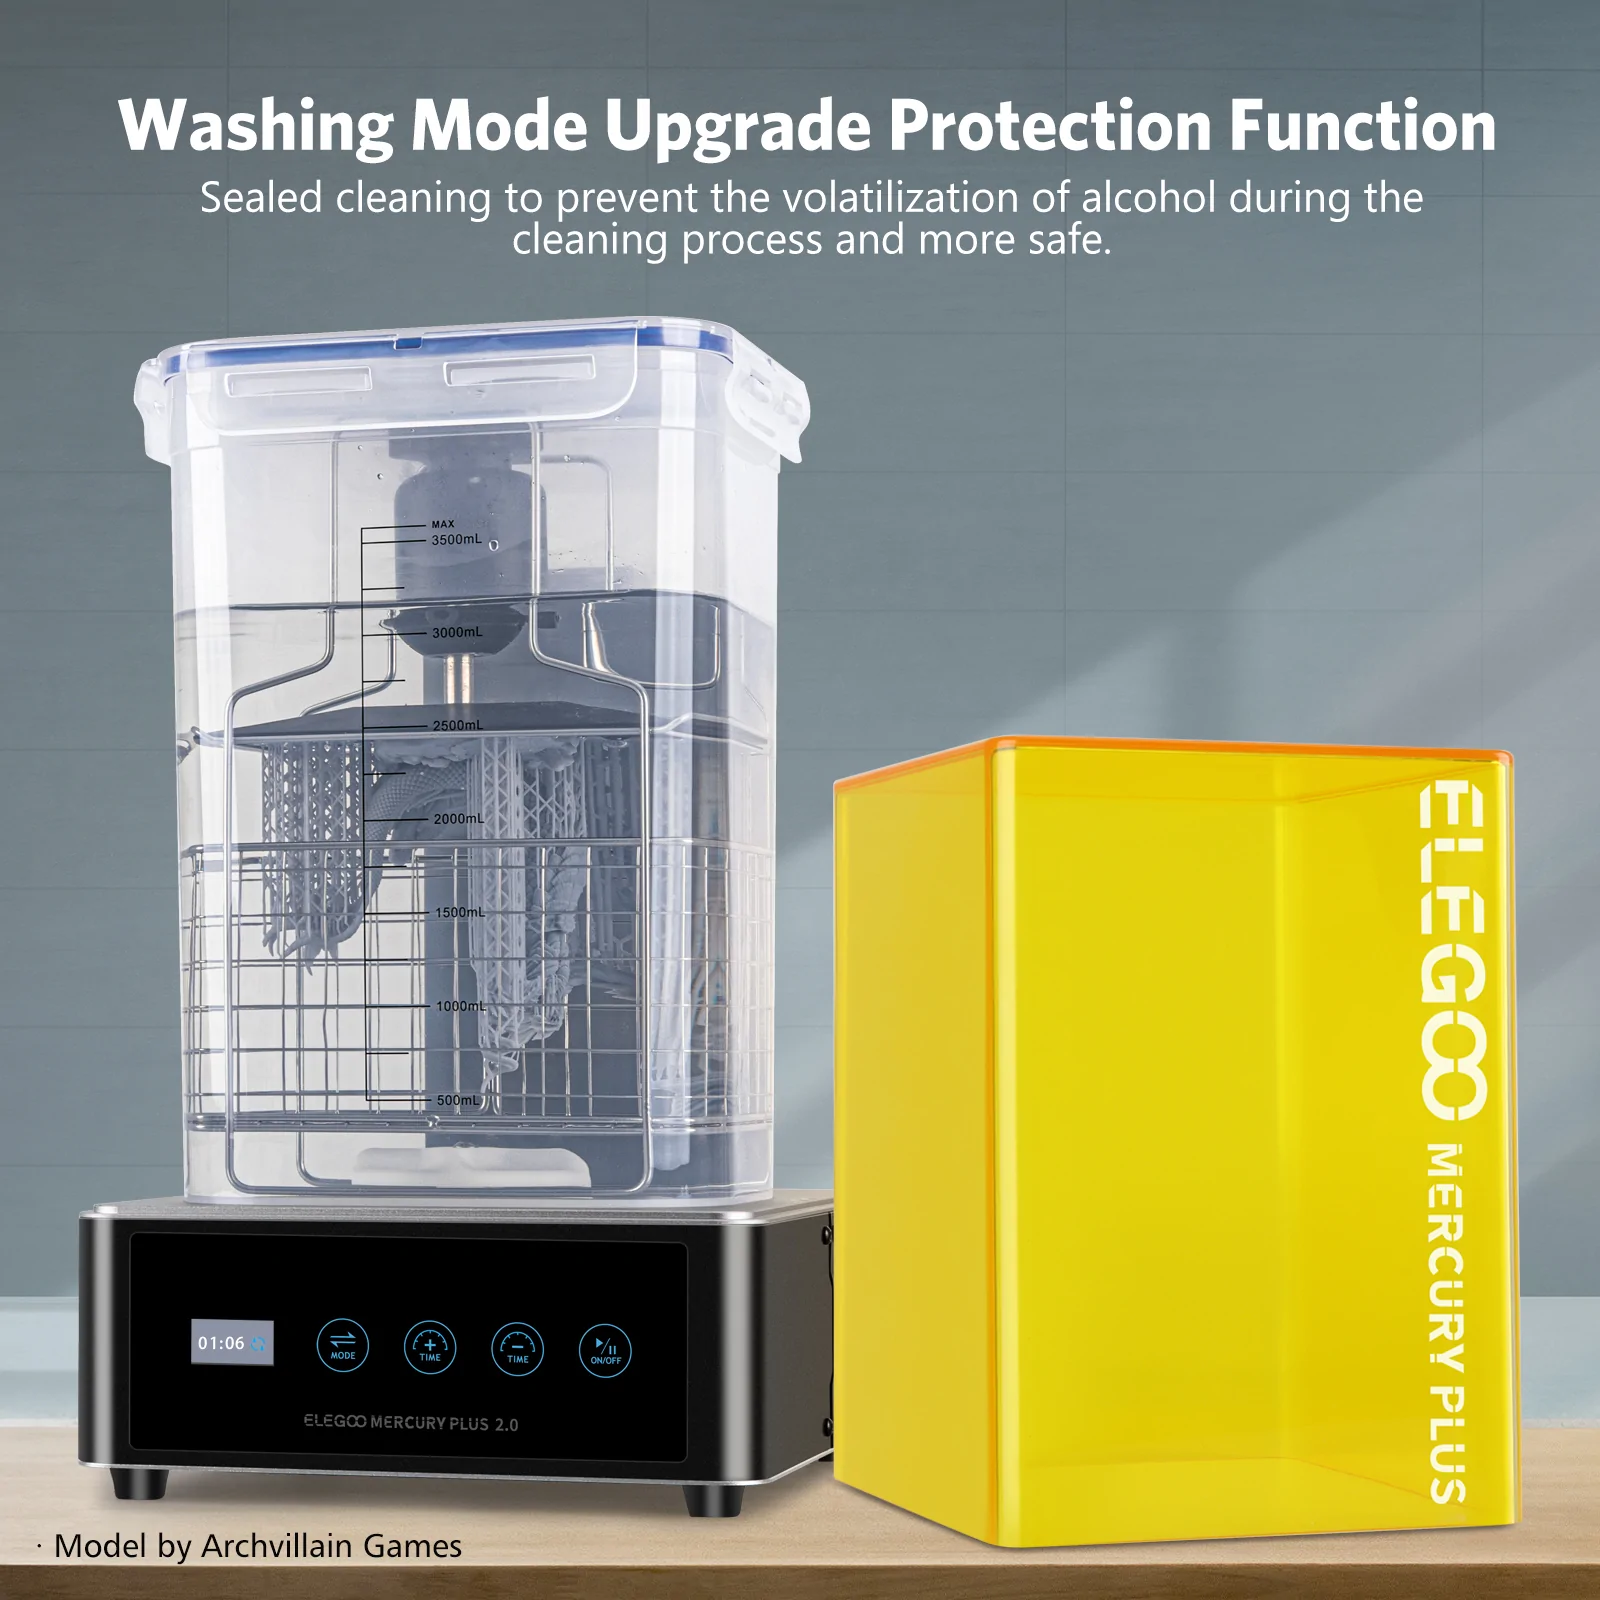 Elegoo Mercury Plus 2 in 1 Washing and Curing Station V2.O features